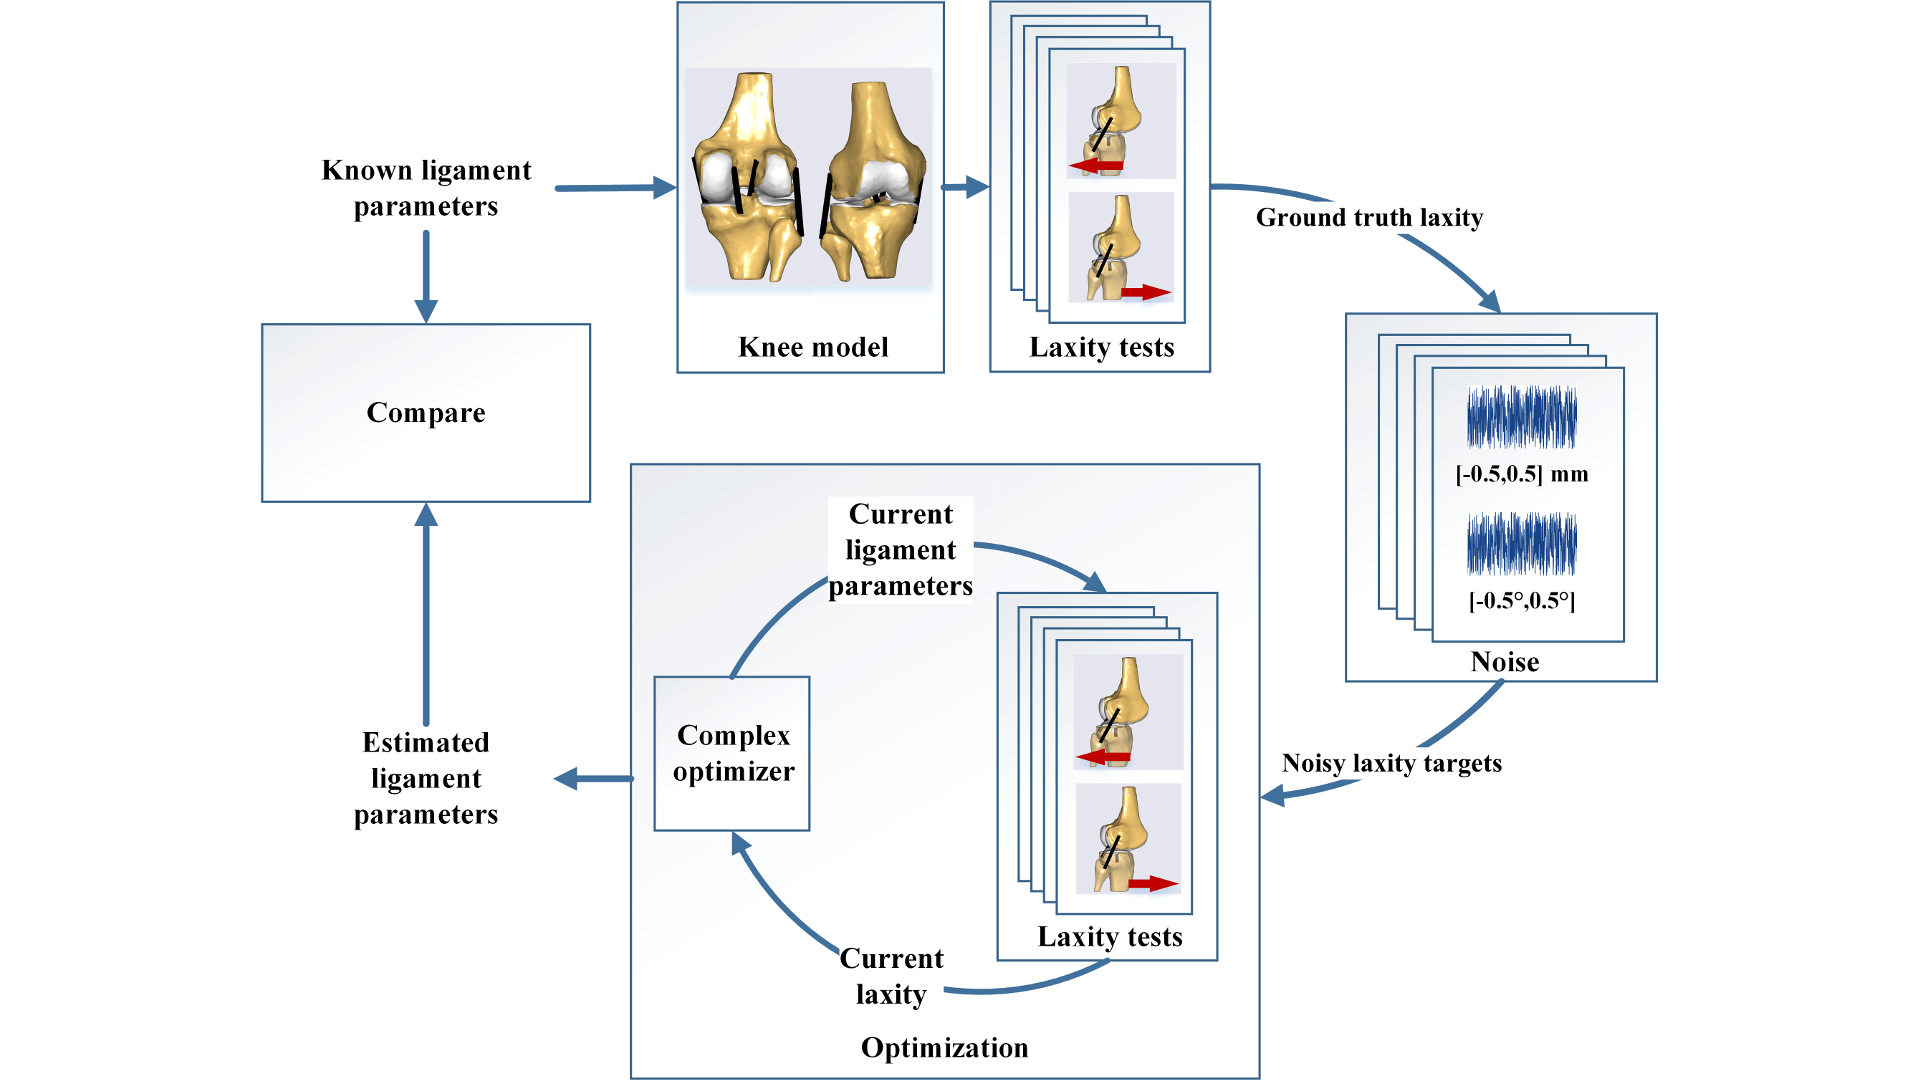 A methodology to evaluate the effects of kinematic measurement uncertainties on knee ligament properties estimated from laxity measurements